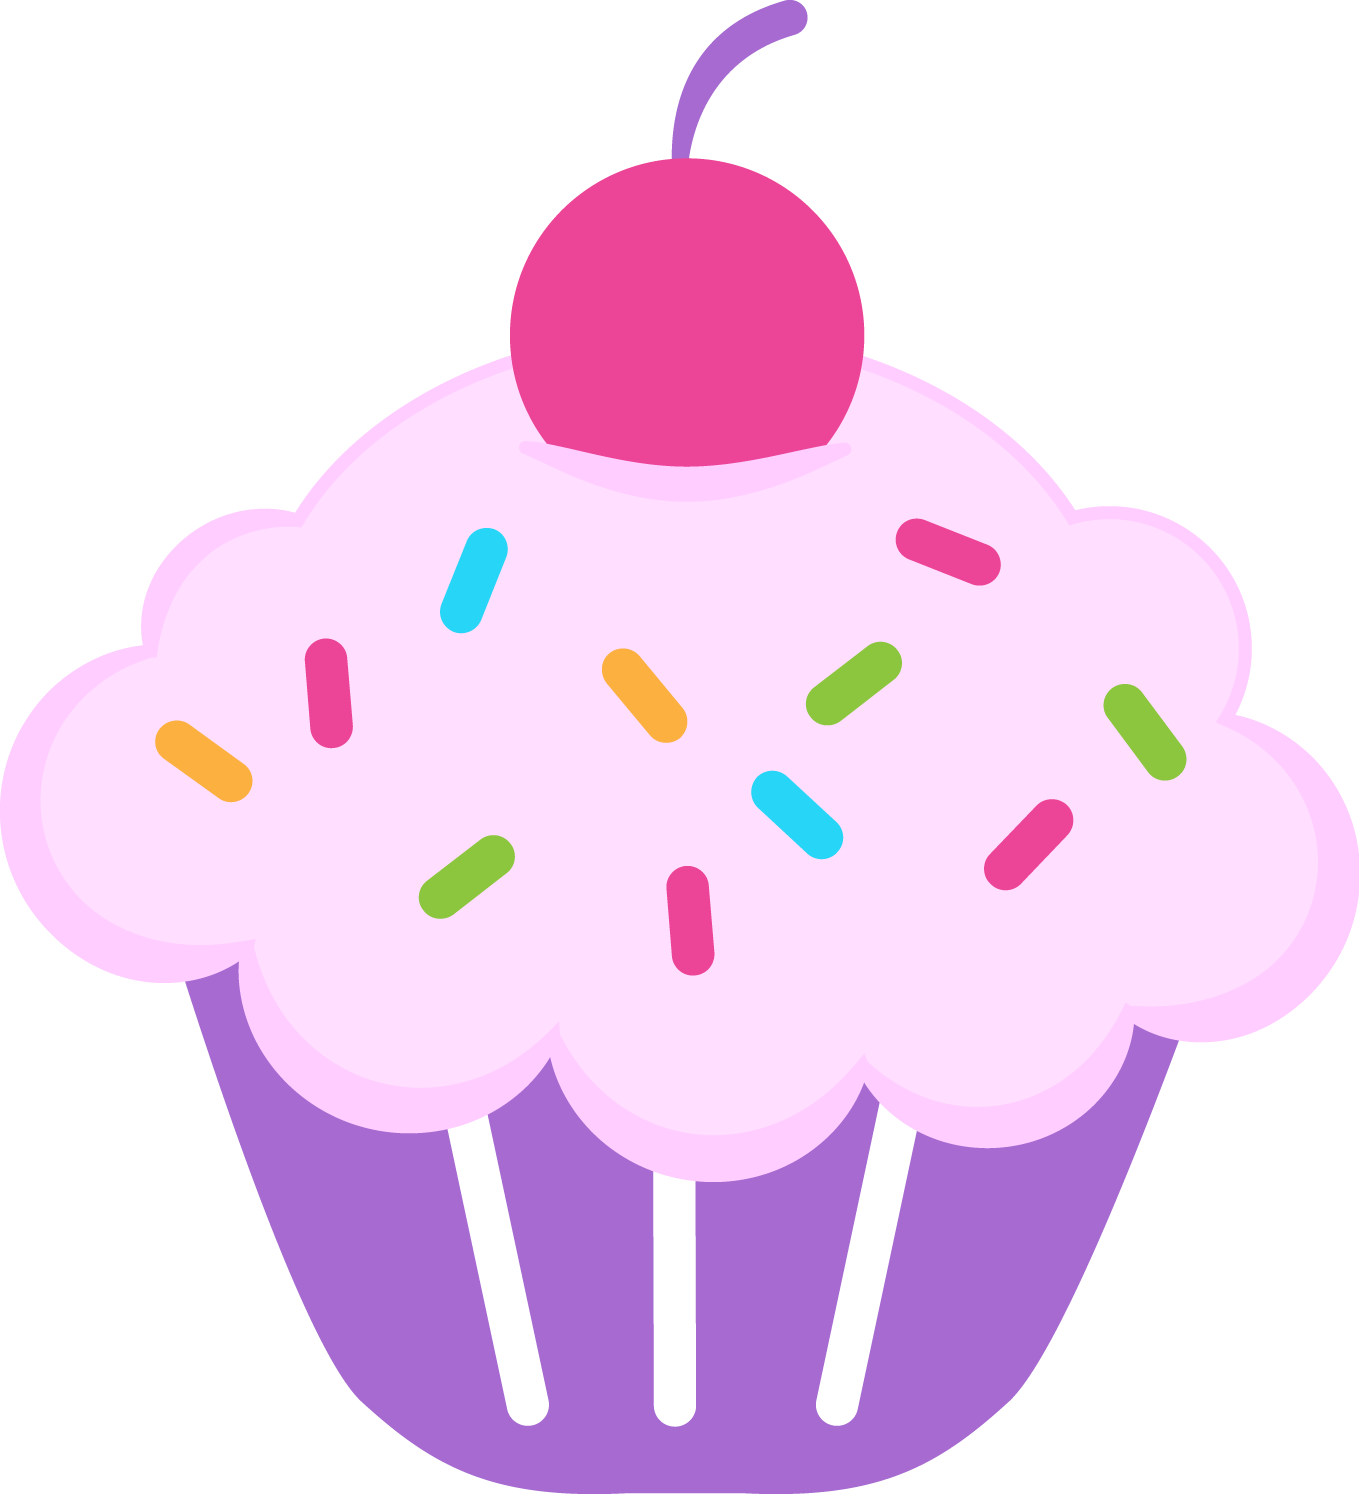 Creative classroom may mi. Muffins clipart cakeclip